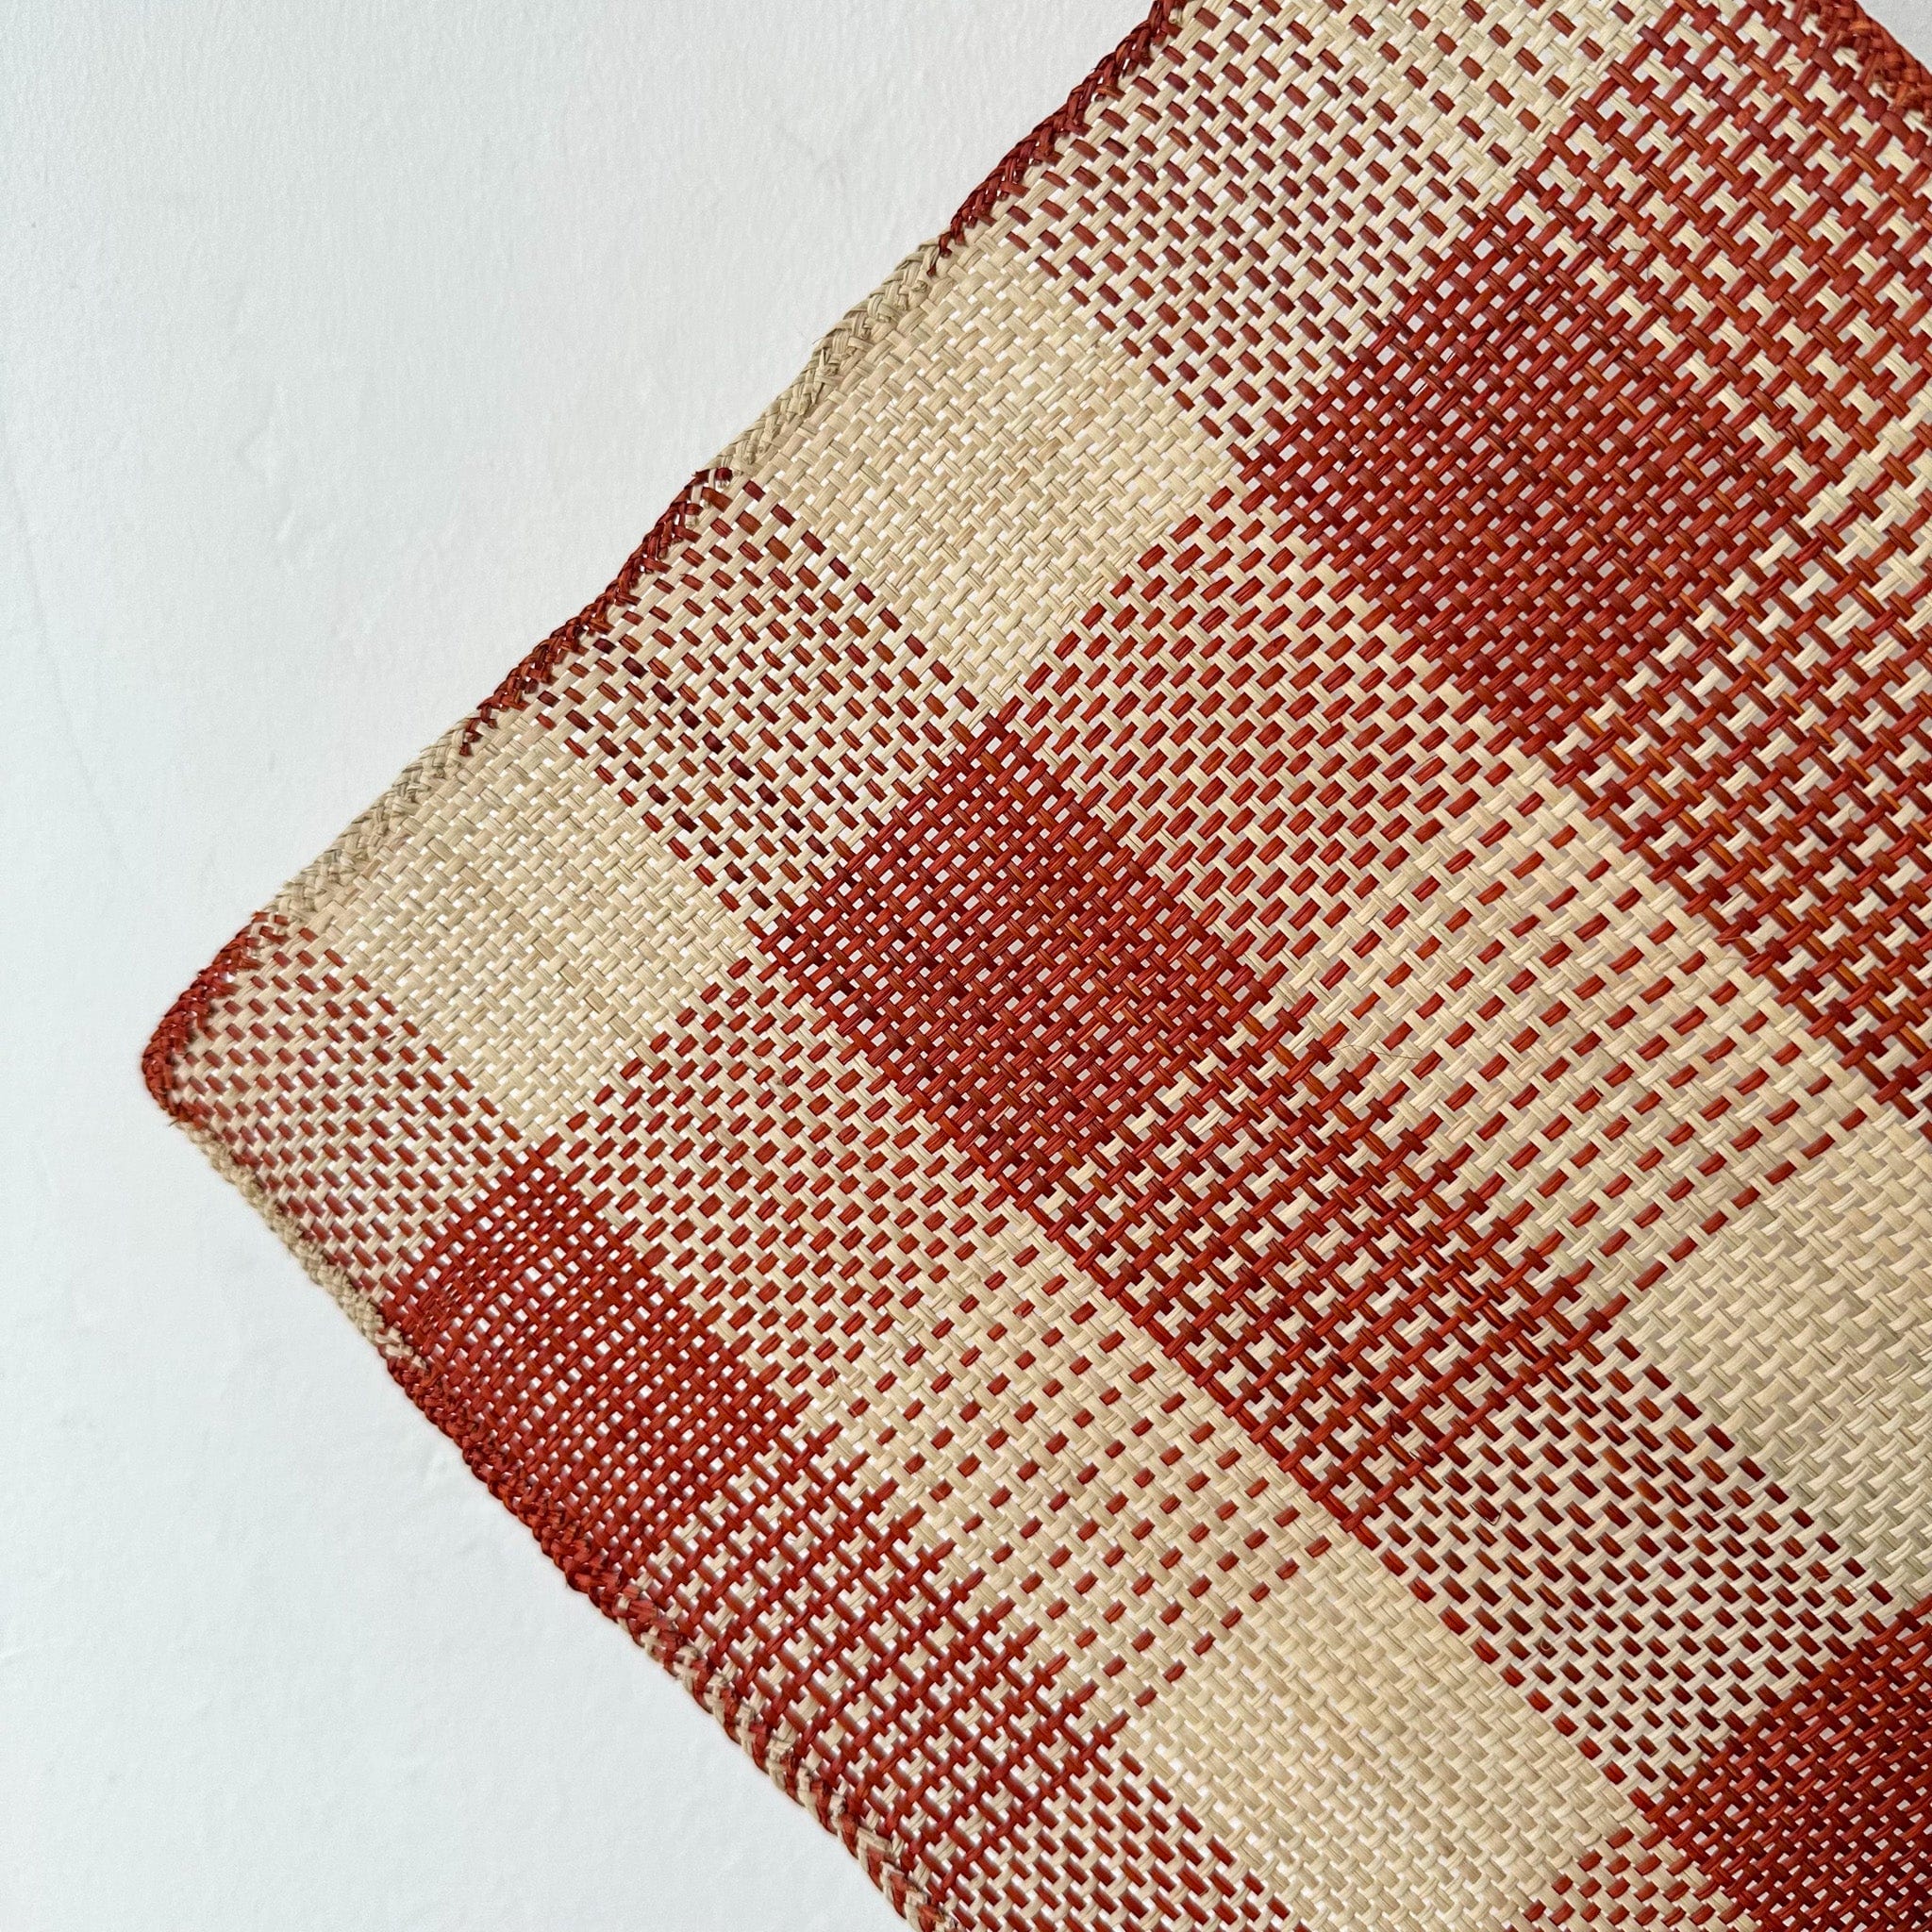 Guanabana Kitchen & Dining Straw placemat  in Beige + Terracotta Plaid by Guanabana